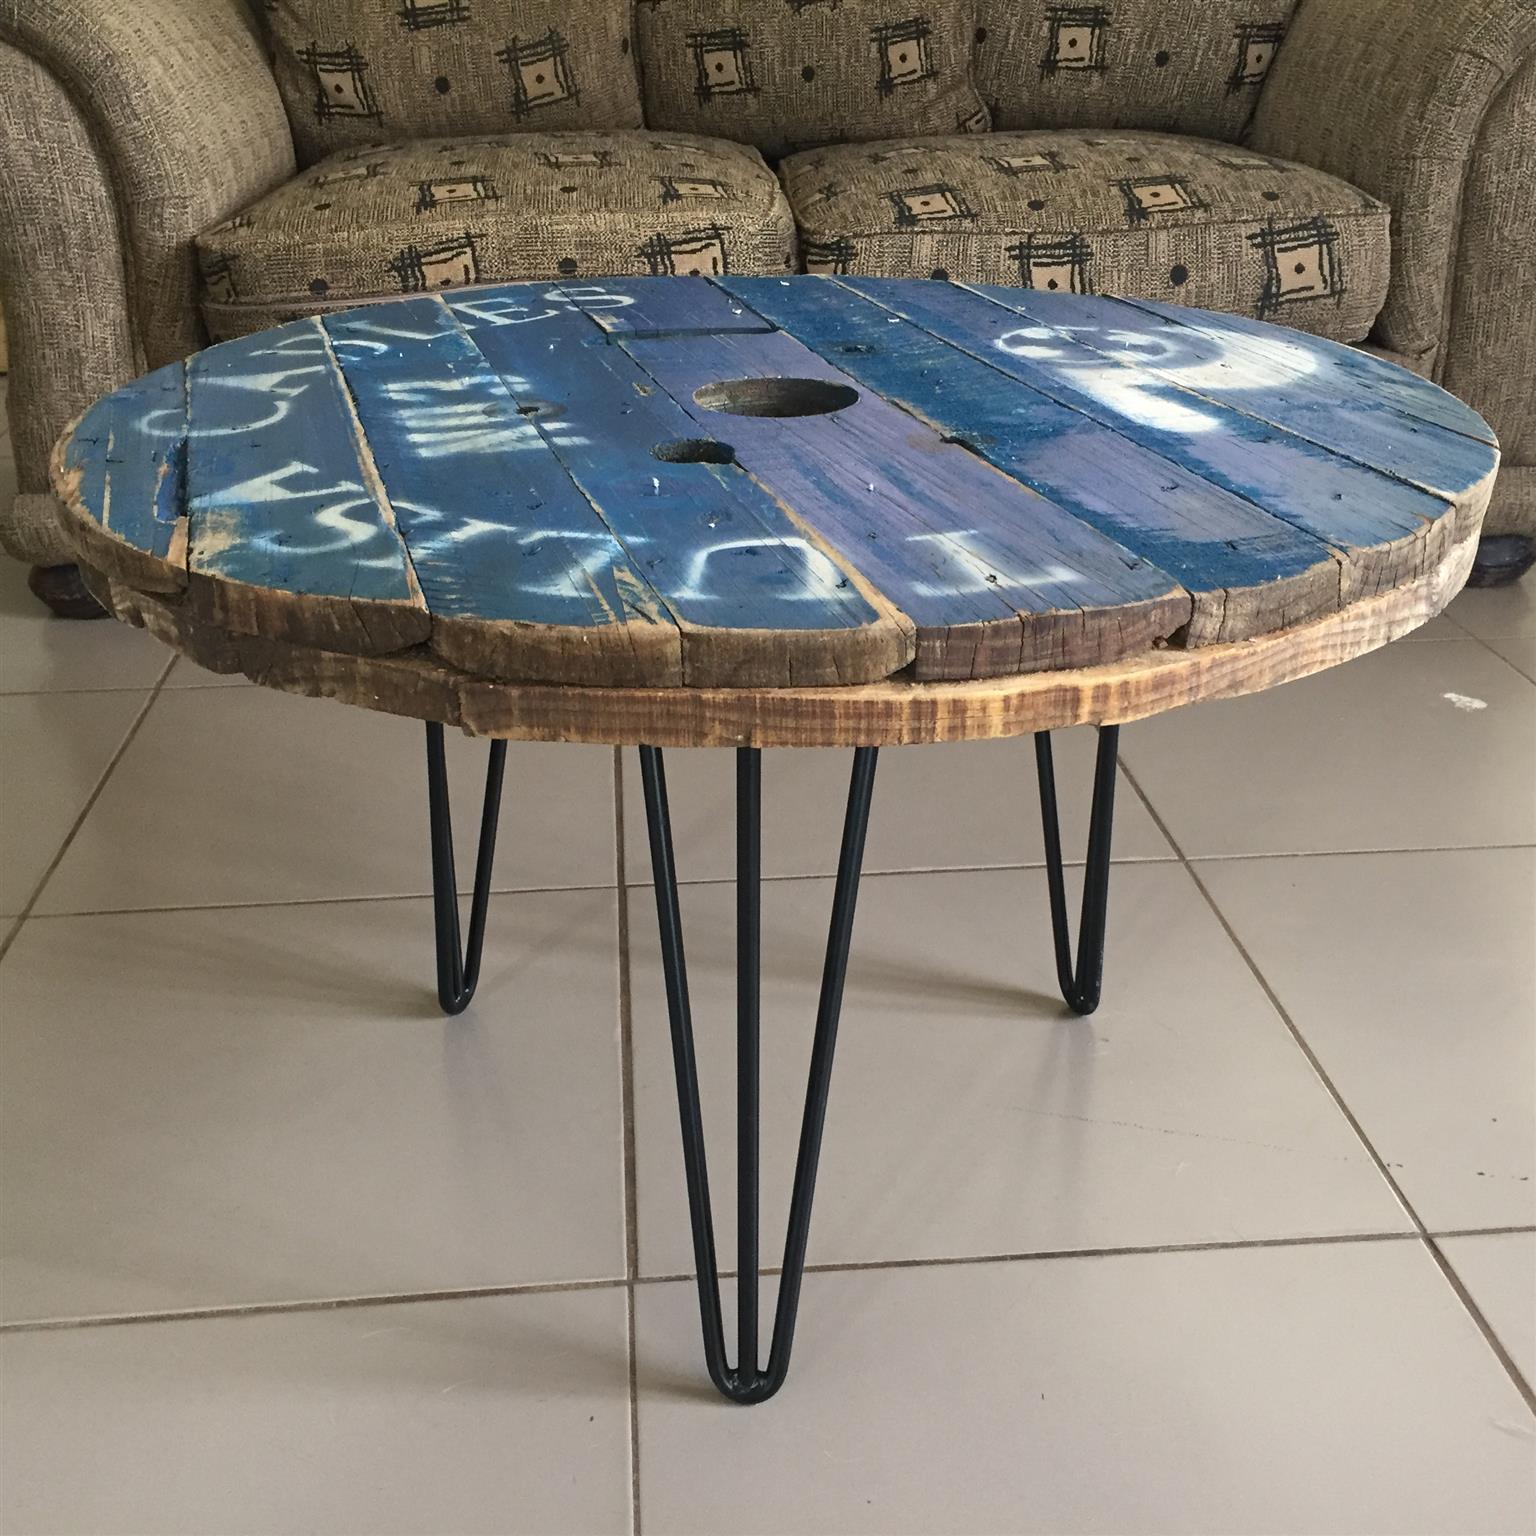 Upcycled table